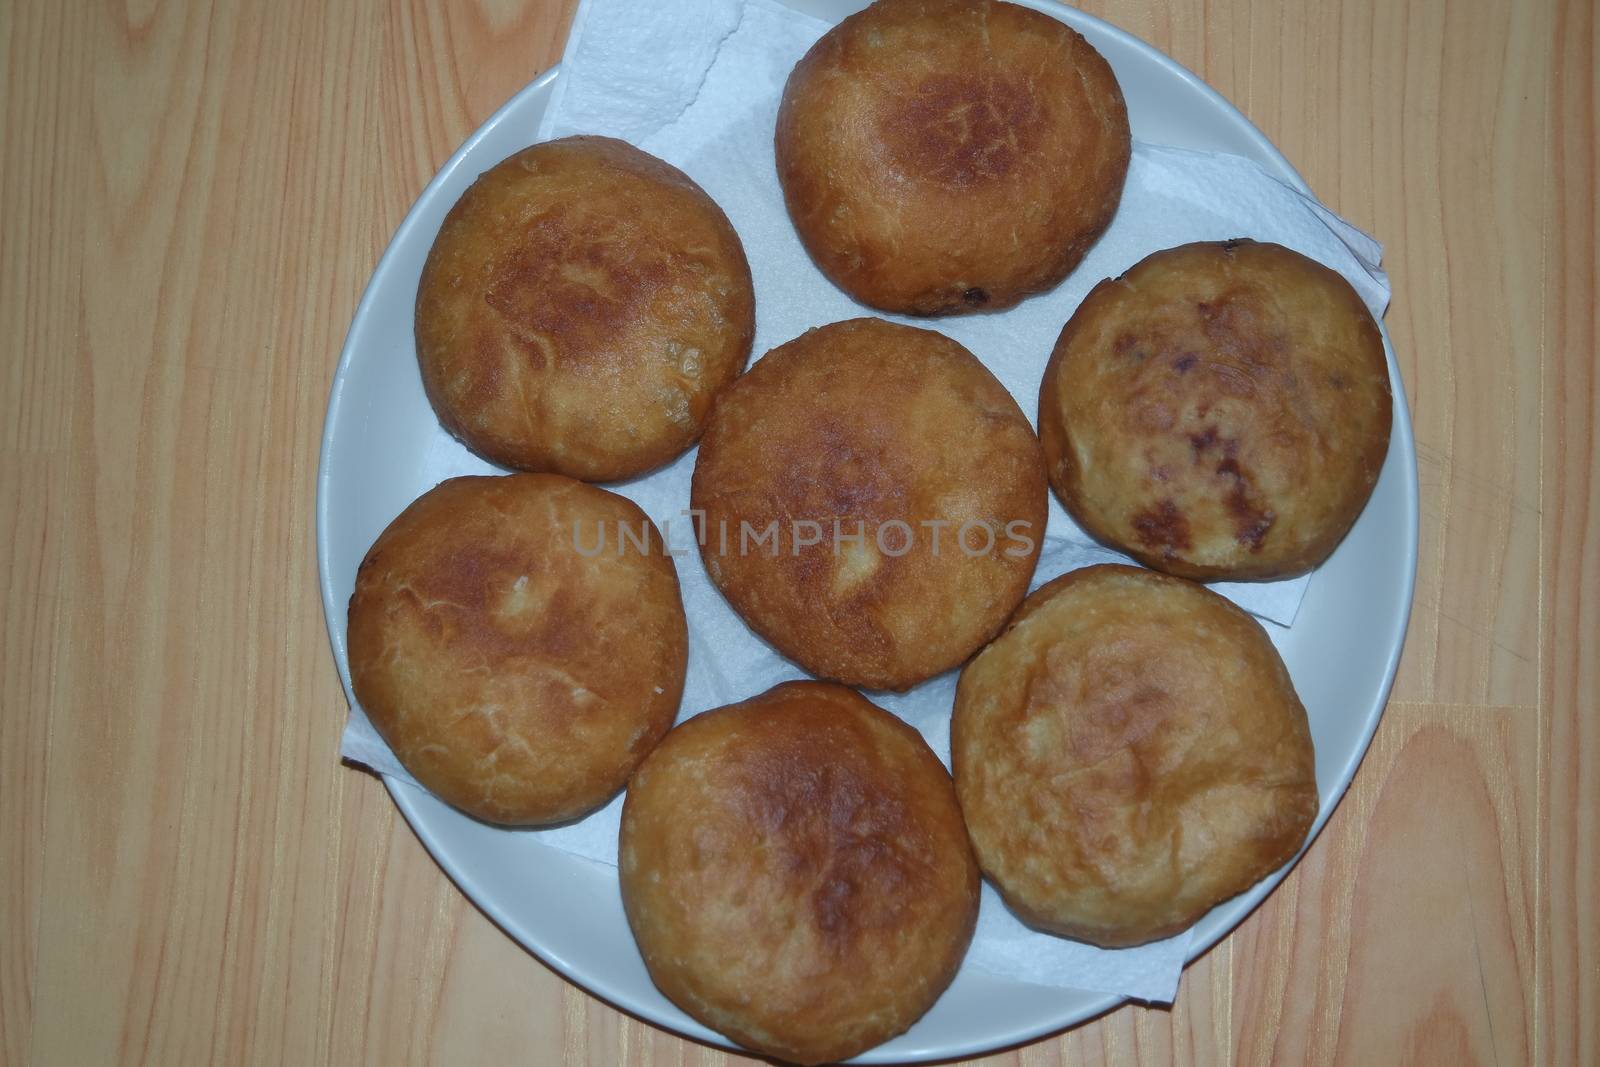 Closeup view of homemade tasty potato bread rolls bun placed in a white plate over a wooden floor.